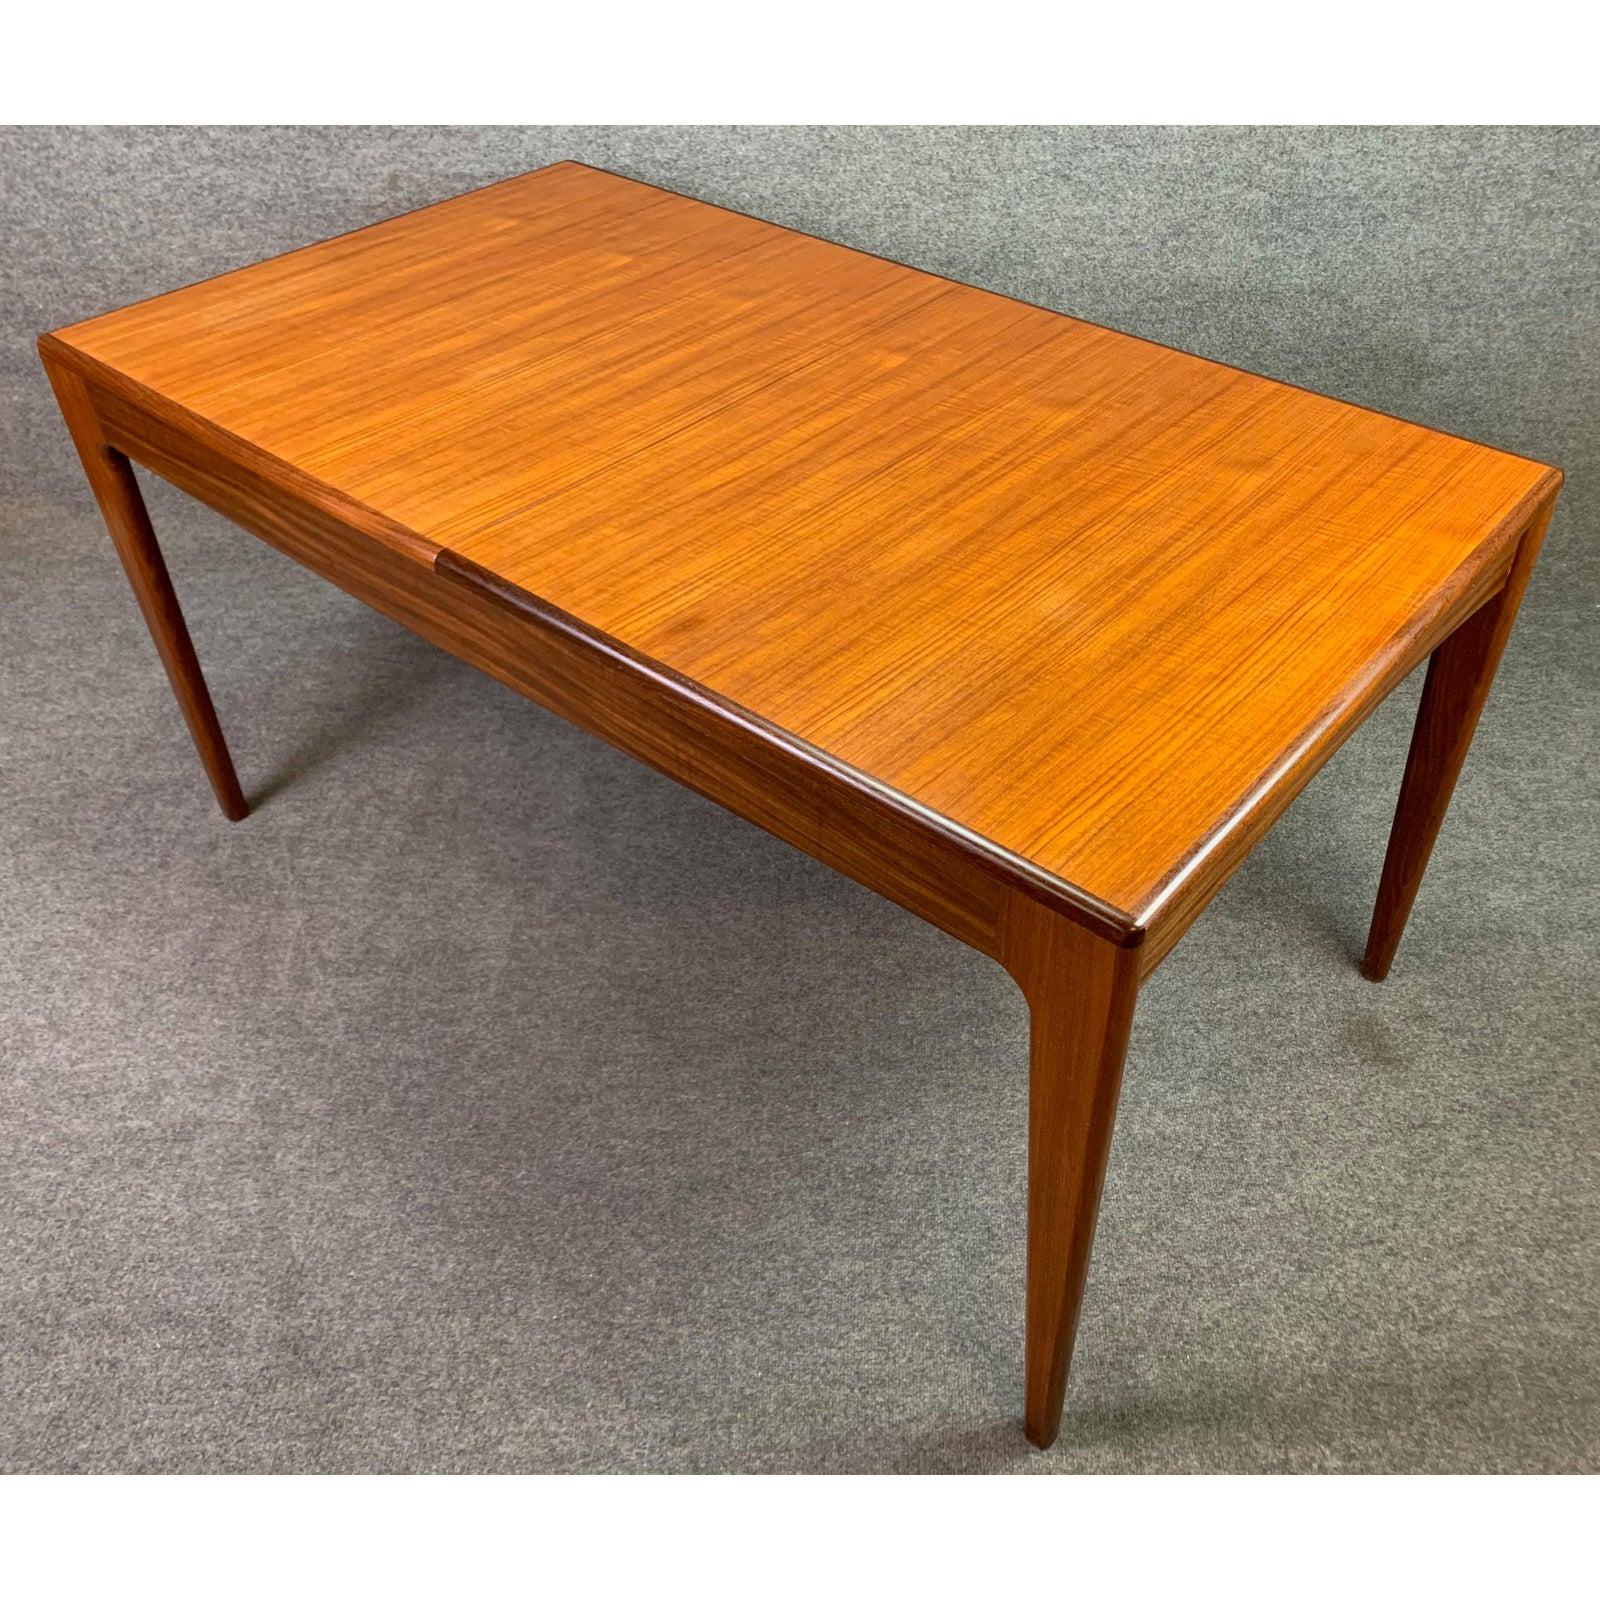 Mid-20th Century Vintage British Midcentury Teak Dining Table by John Herbert for A. Younger